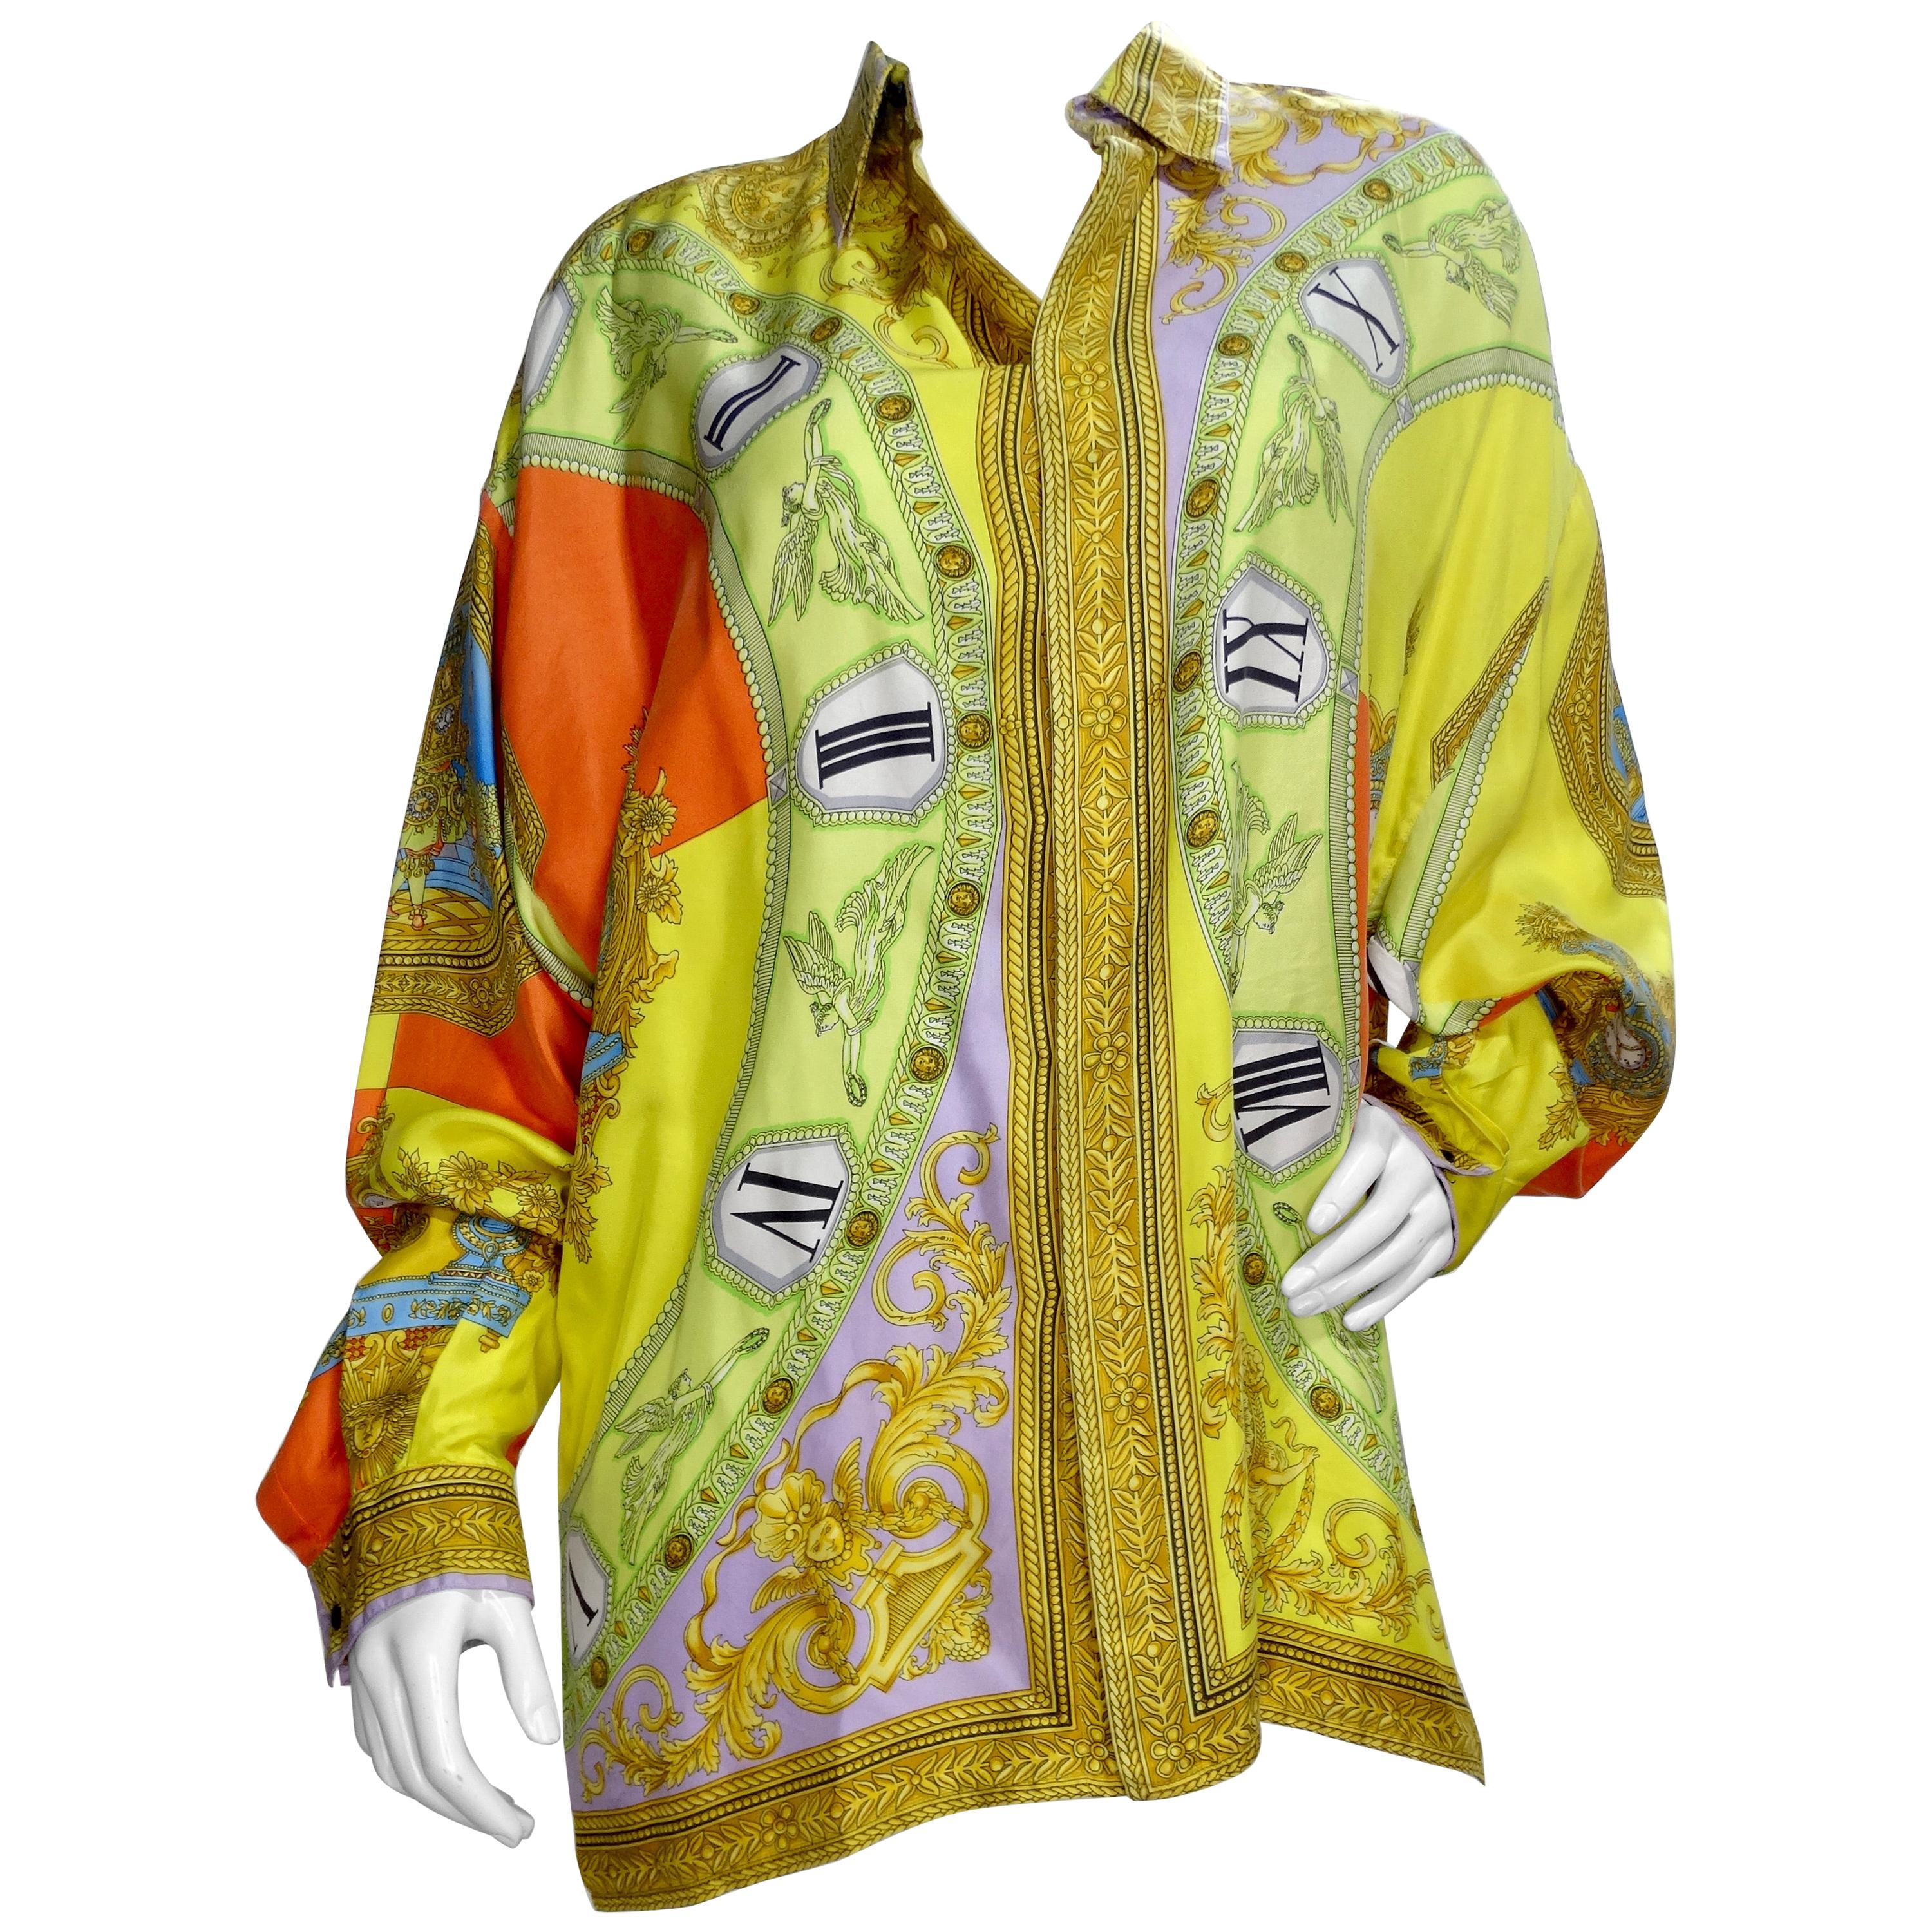 Snag yourself a piece from the Versace archives! Circa 1990s, this silk shirt features a colorful roman clock motif with images throughout of the Medusa medallion, Baroque designs and detailed portraits. Classic and timeless, this coveted piece will